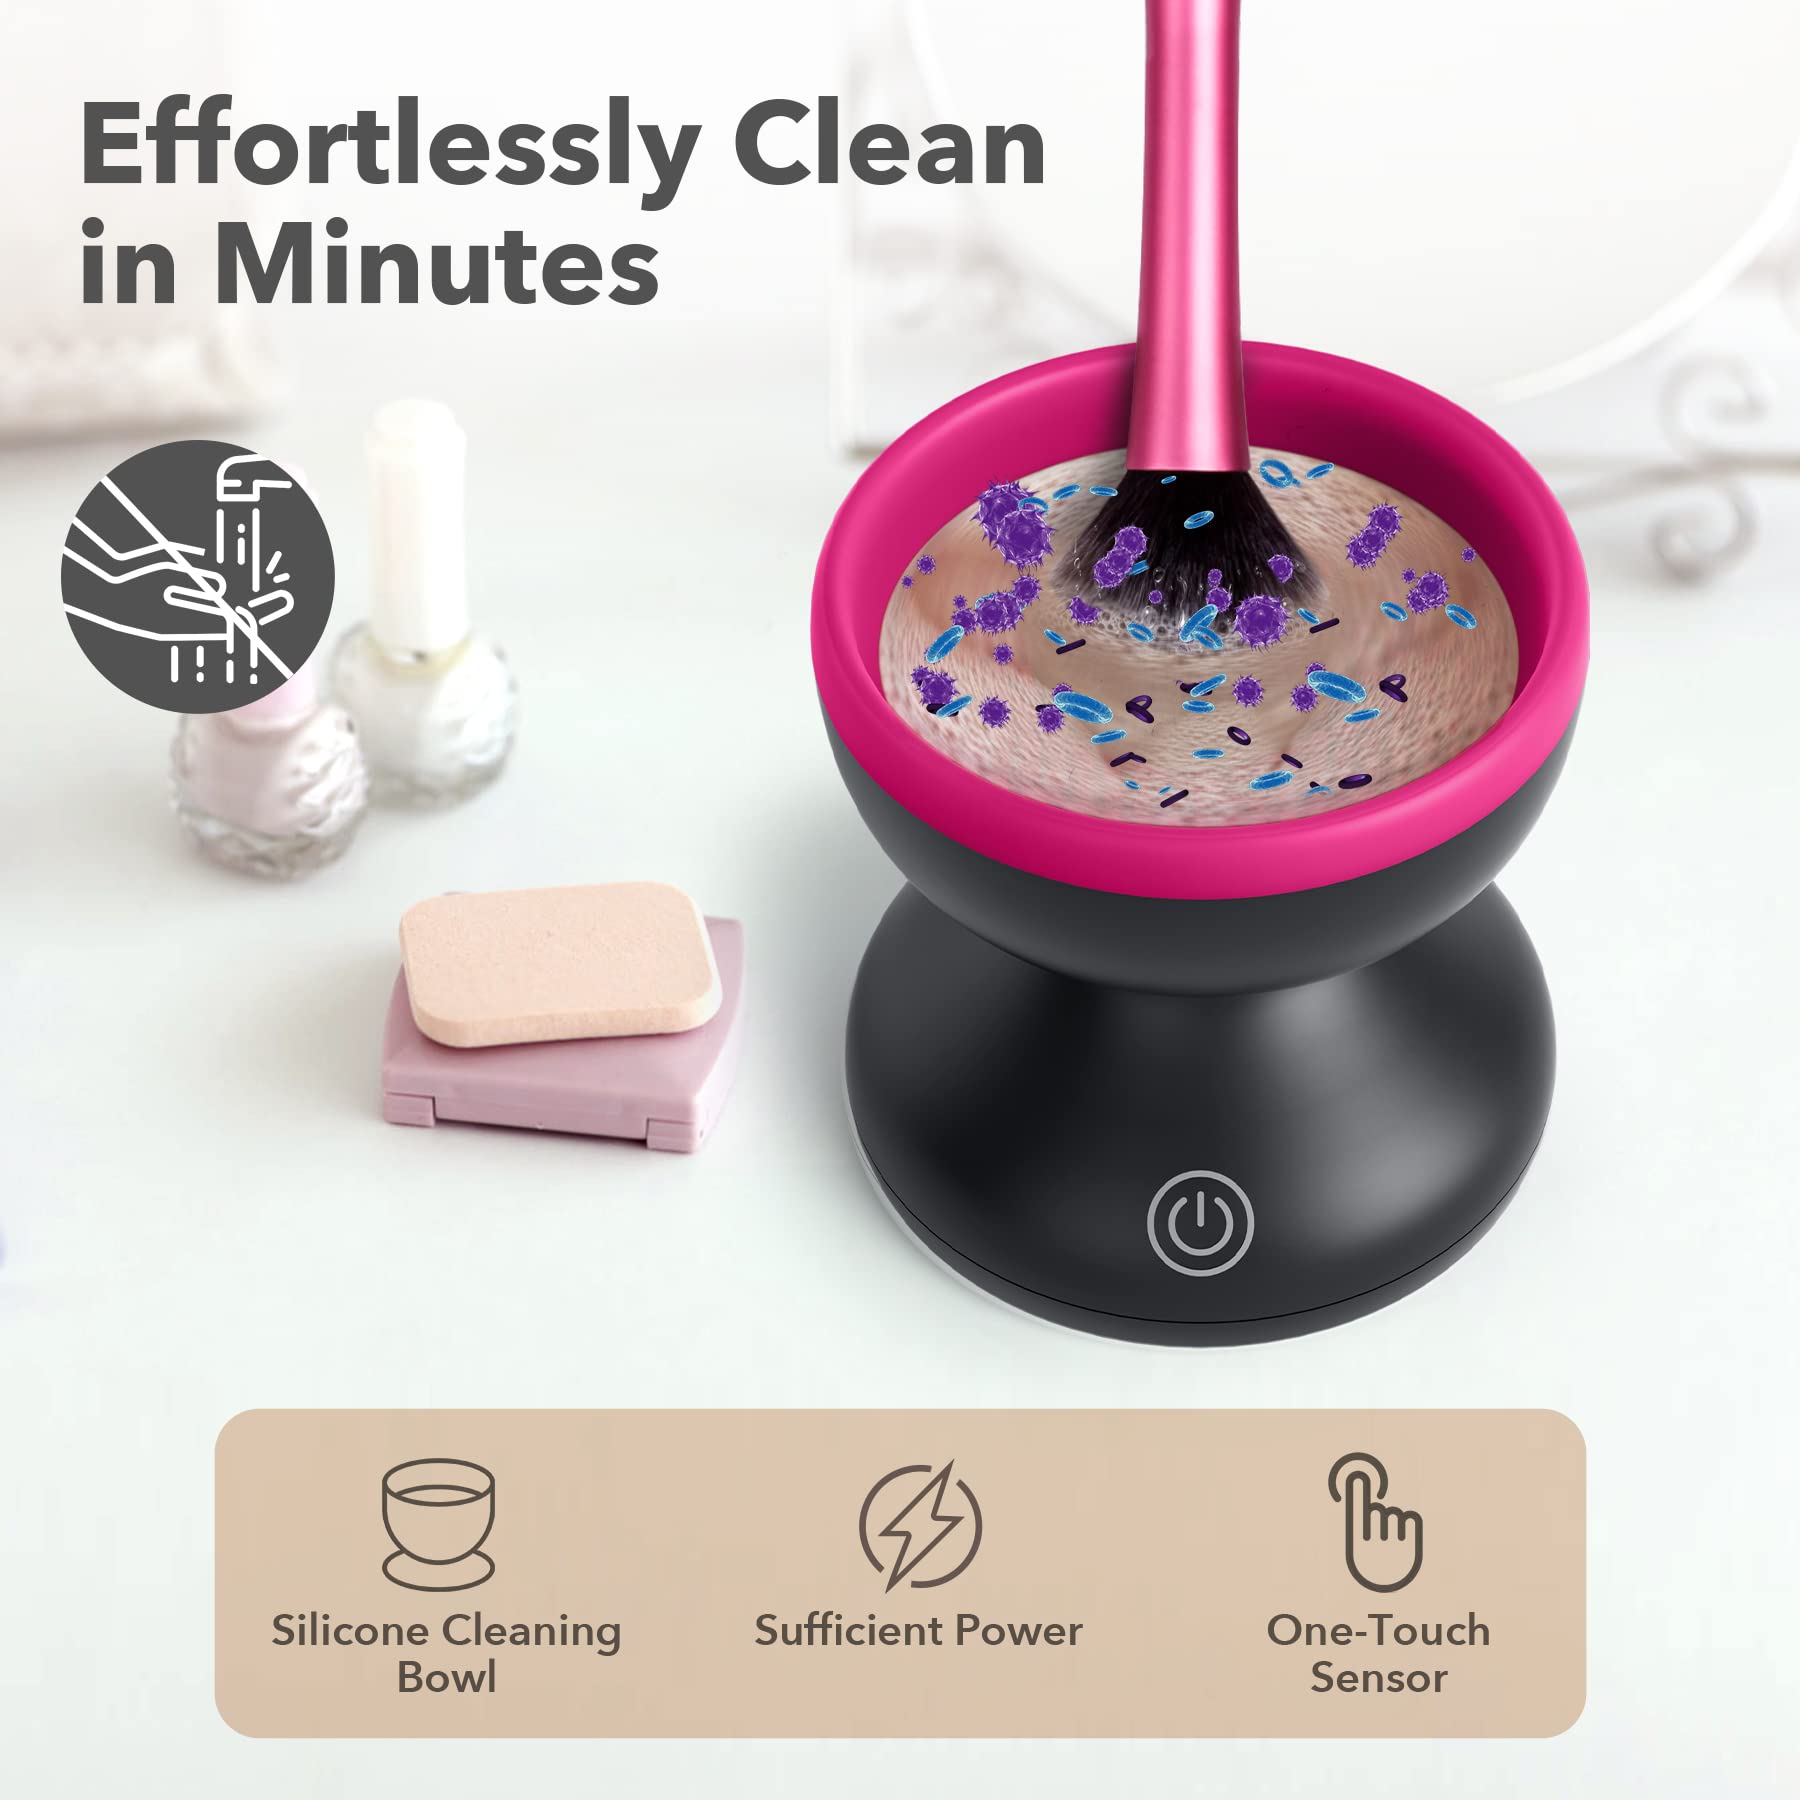 ⏰LAST DAY 50% OFF⏰-Makeup Brush Cleaner